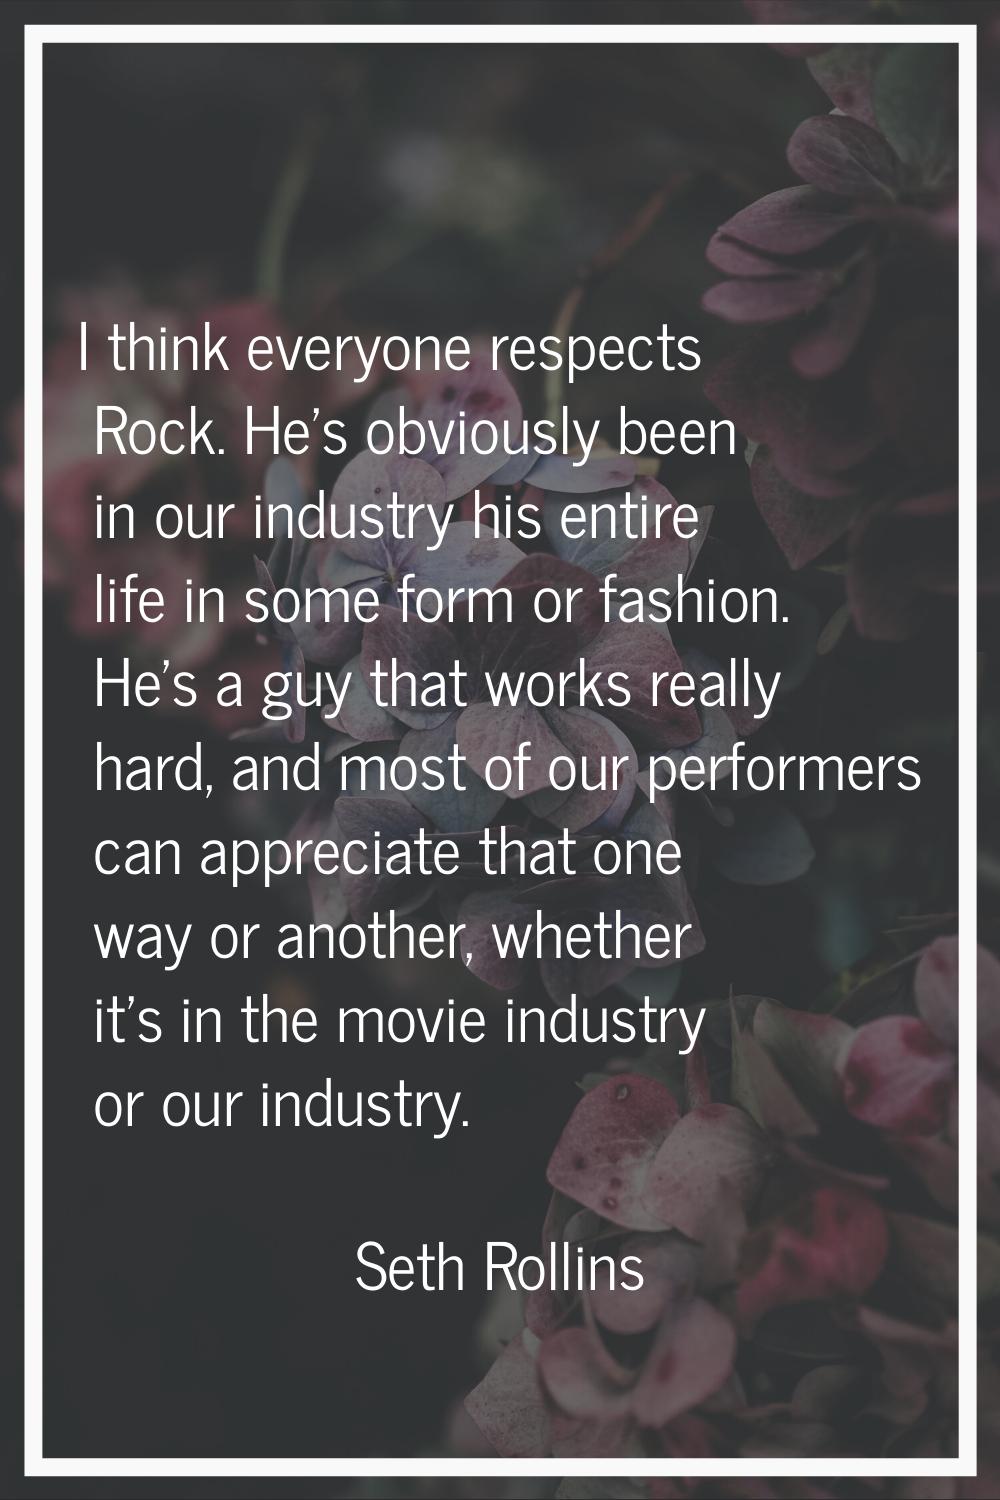 I think everyone respects Rock. He's obviously been in our industry his entire life in some form or